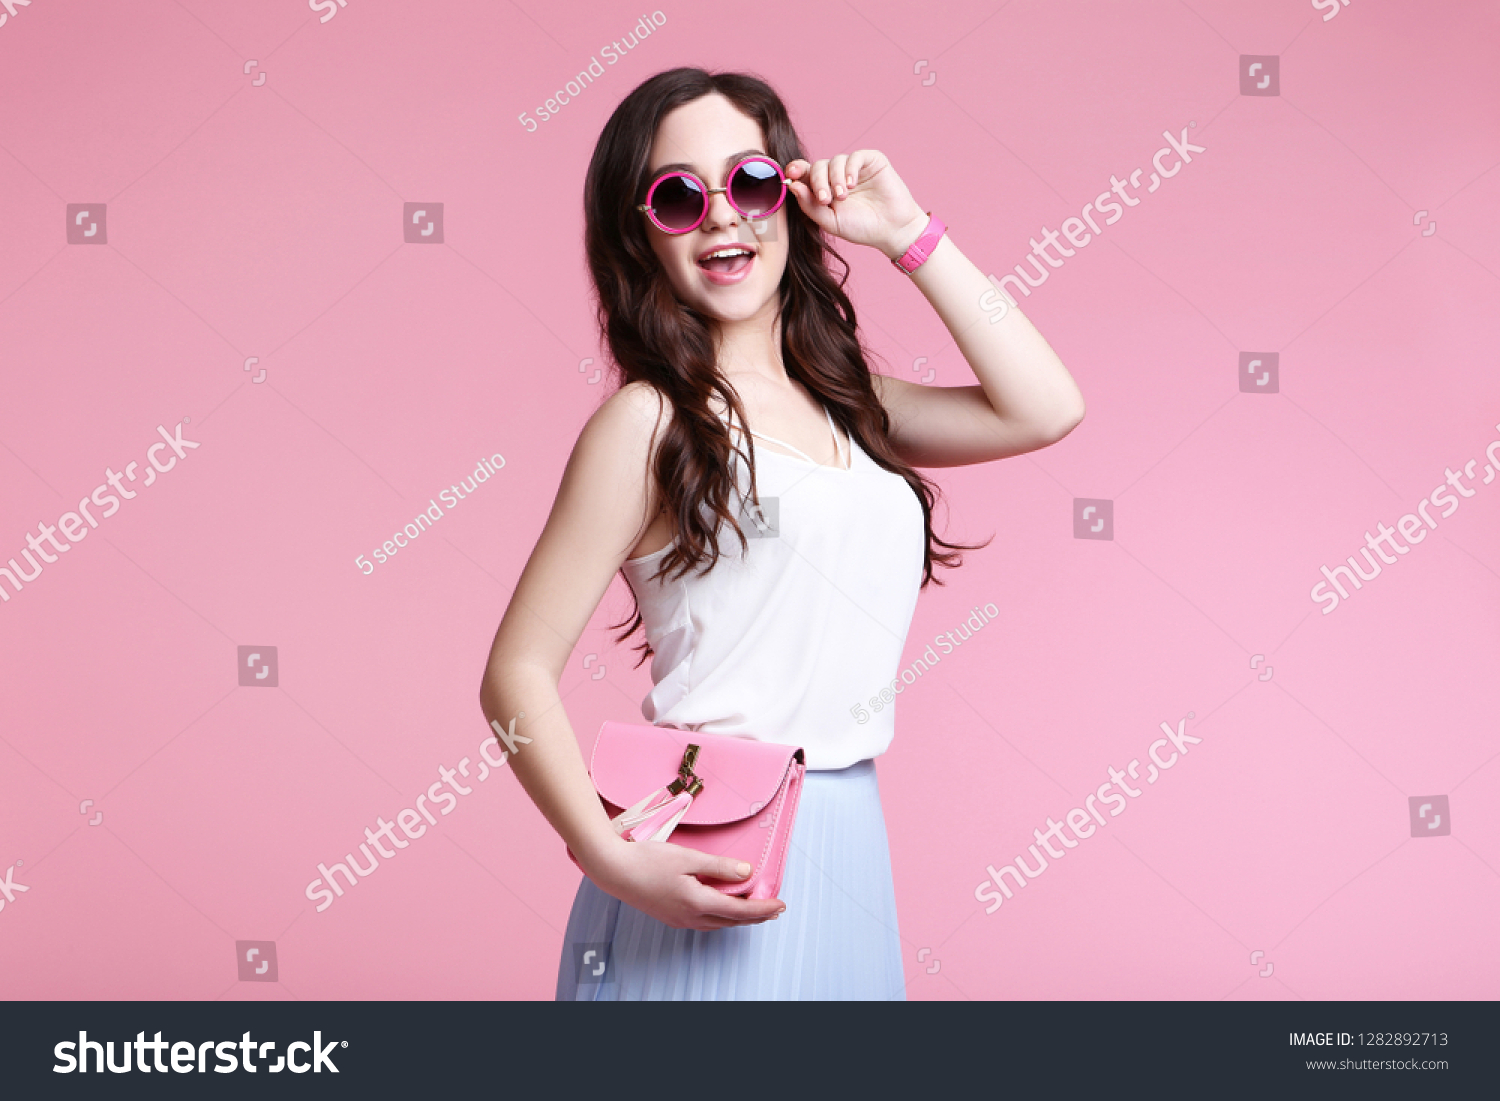 Beautiful young woman with handbag on pink background #1282892713